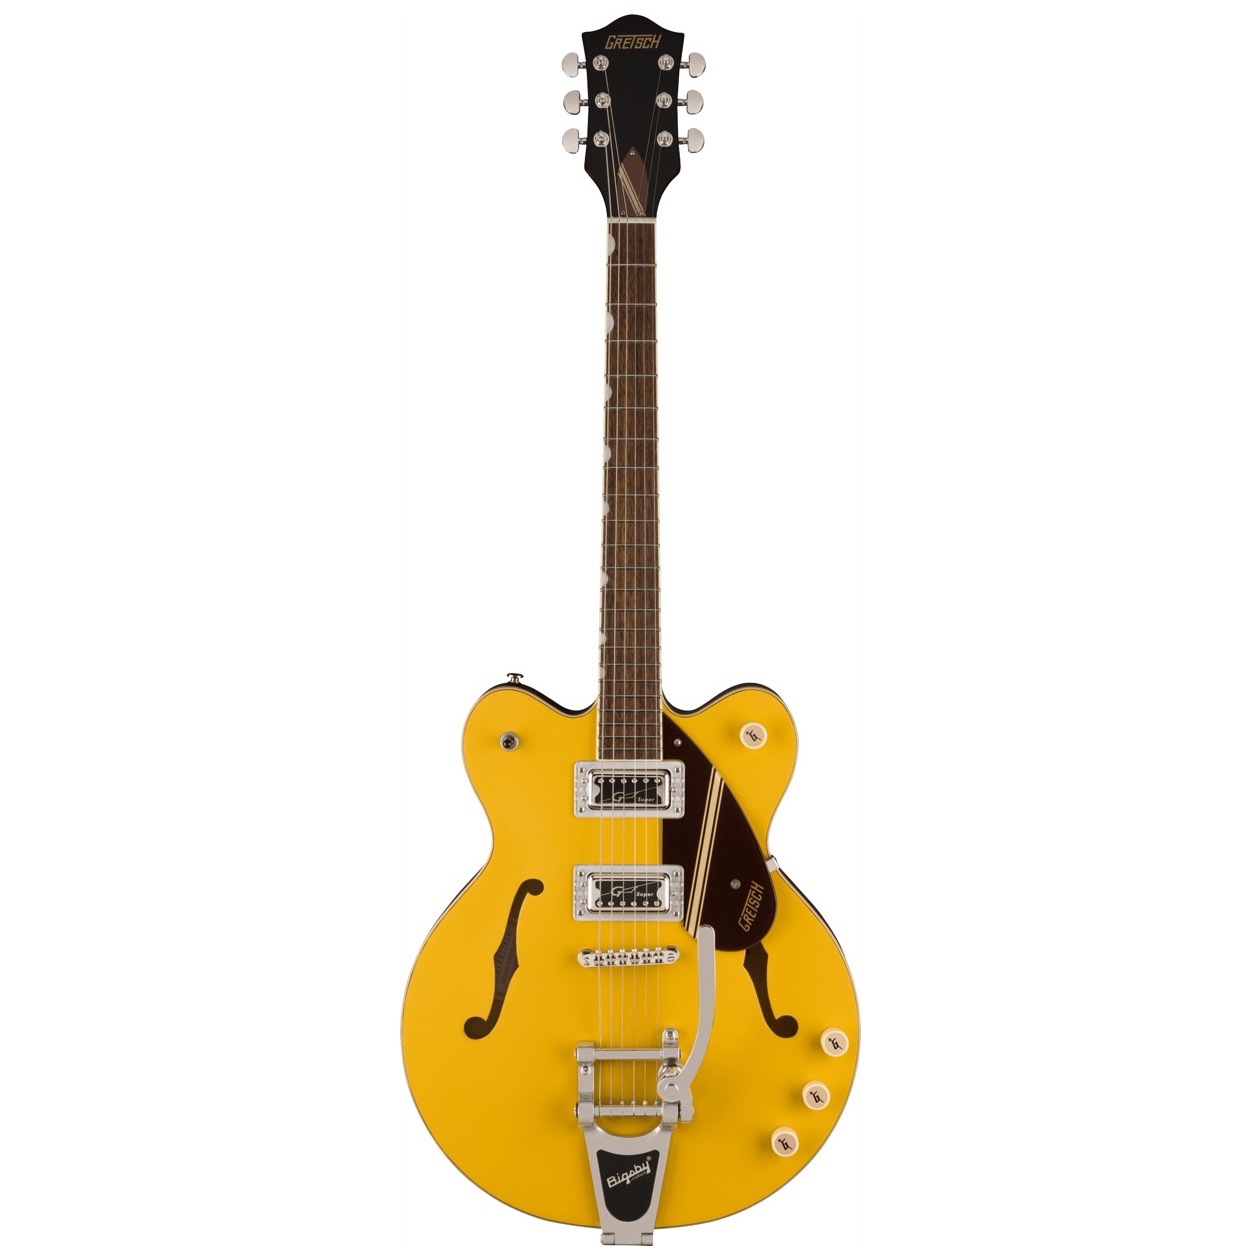 Gretsch G 2604 T / G2604T Limited Edition Streamliner Rally II Center Block with Bigsby, Laurel Fingerboard, Two-Tone Bamboo Yellow/Copper Metallic, NIEUW 2023 MODEL !